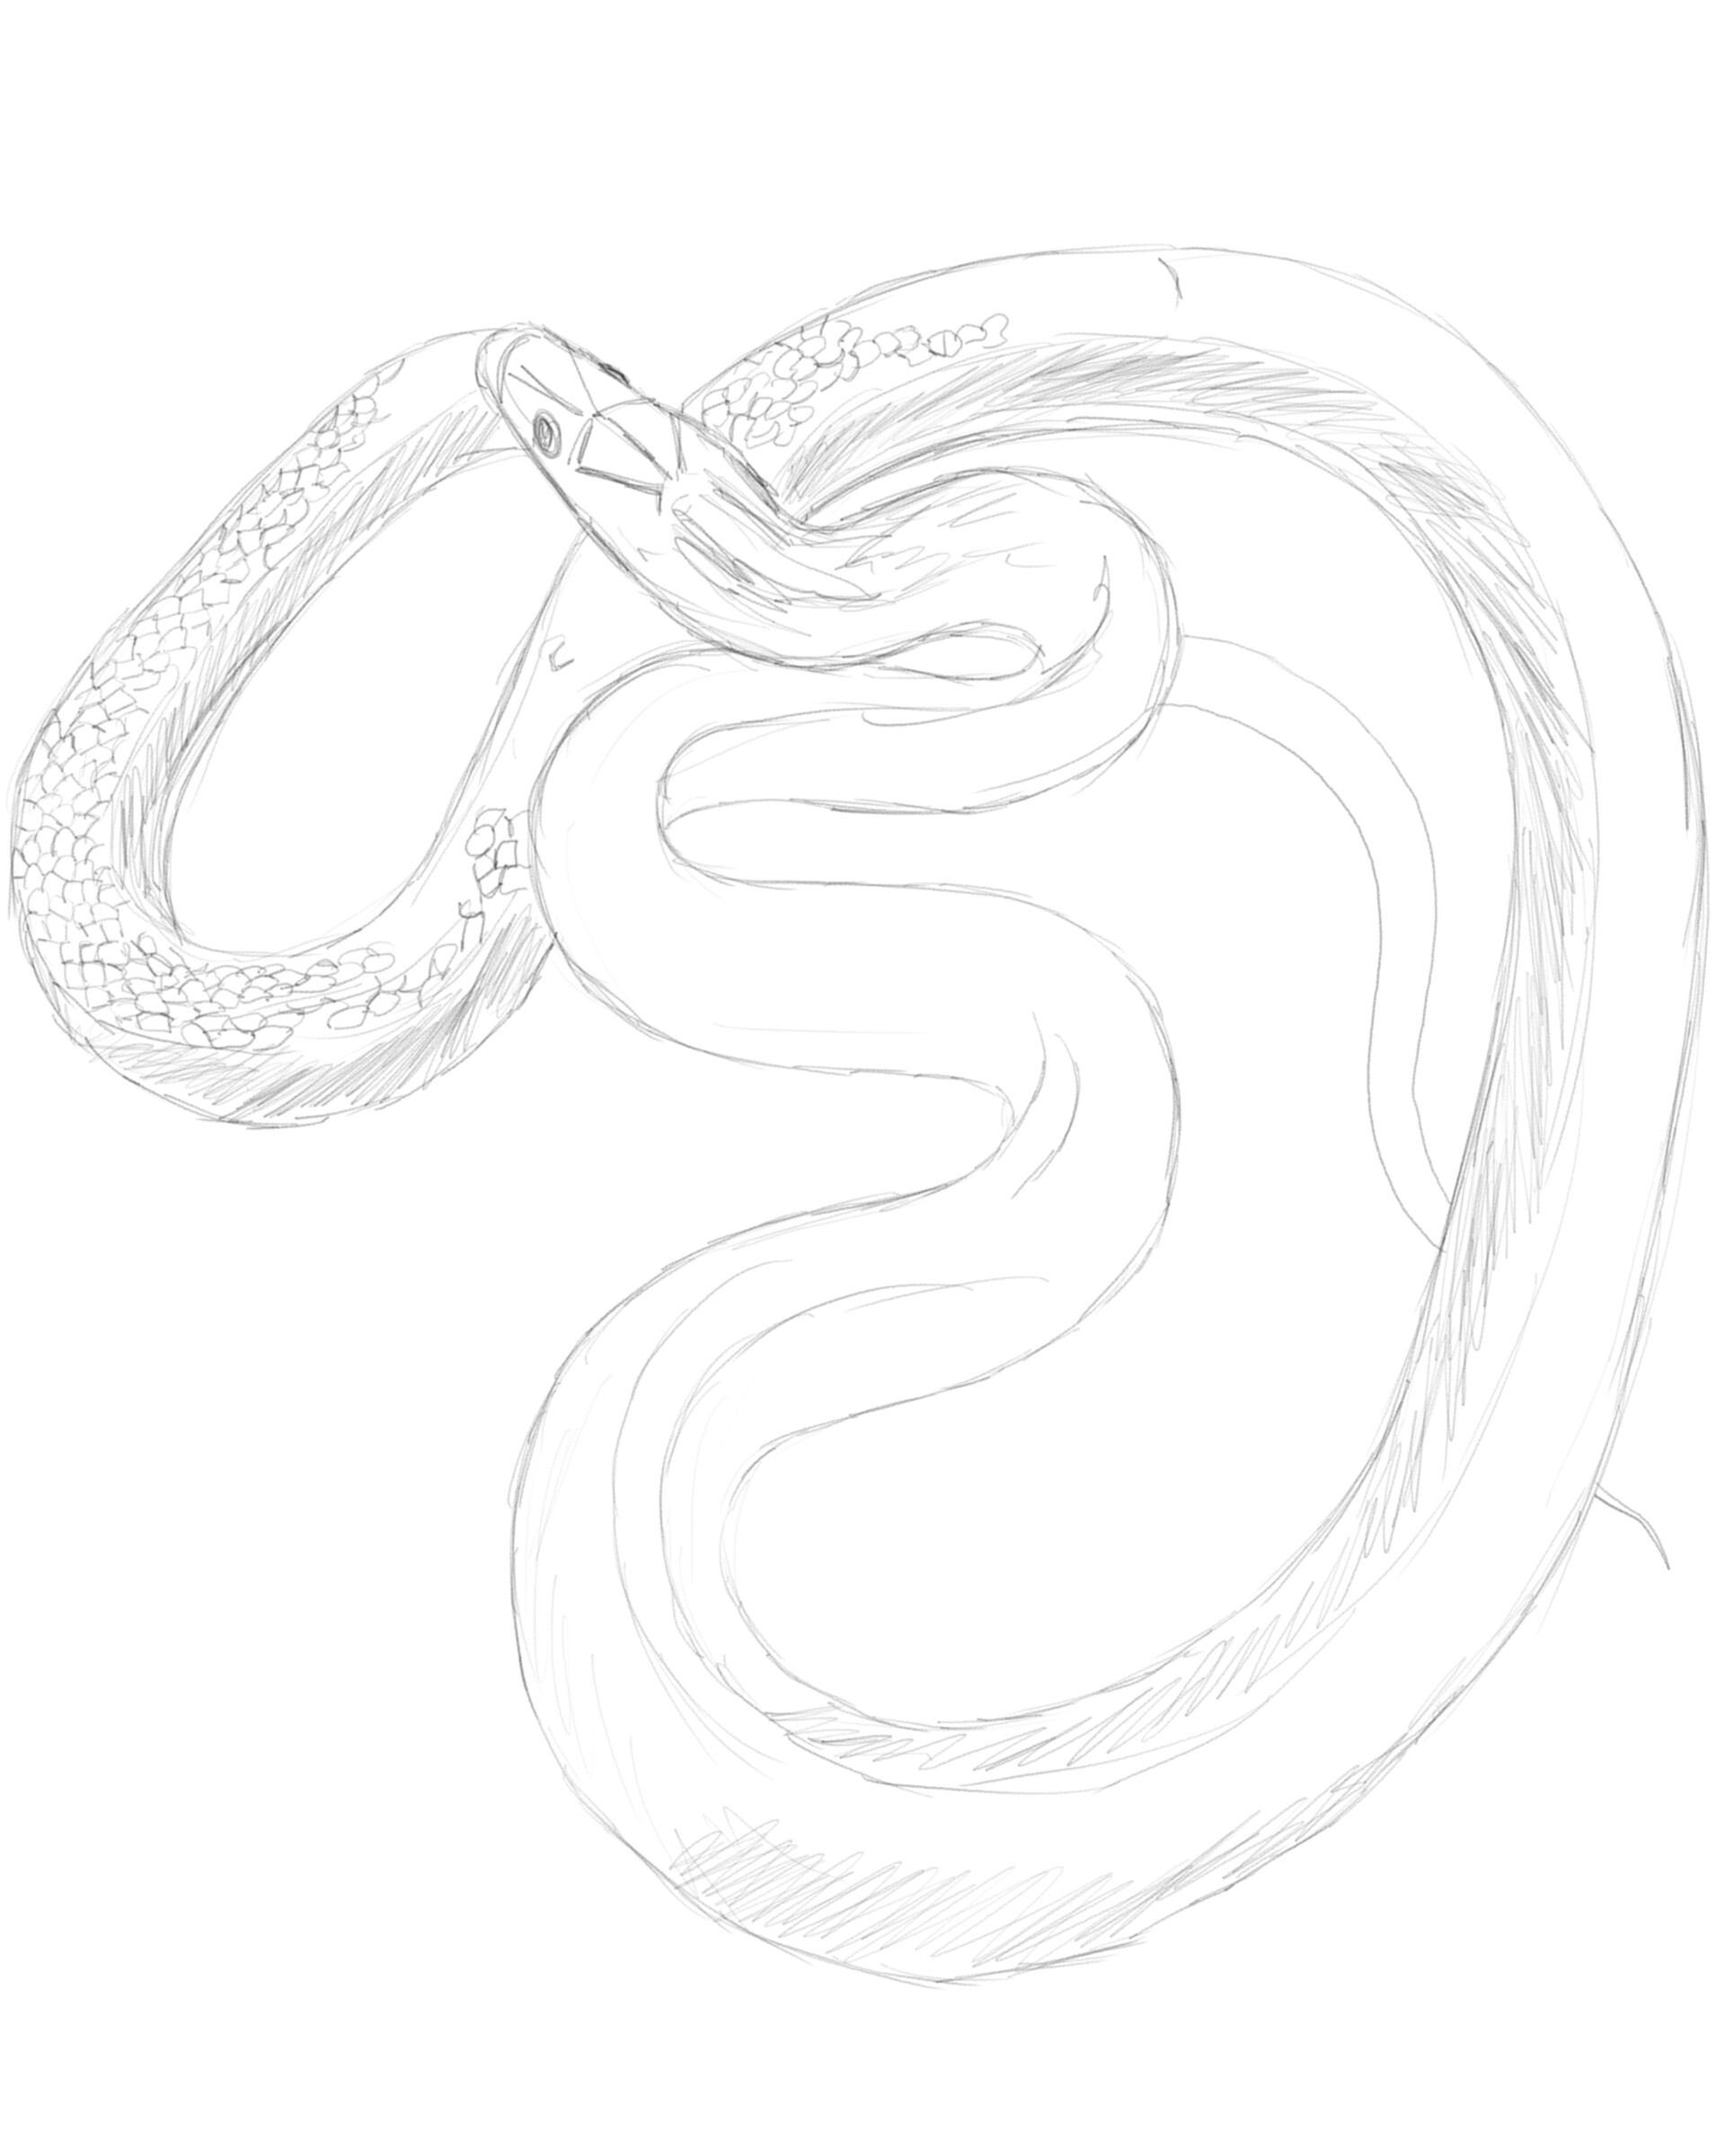 Cartoon Snake Drawing  How To Draw A Cartoon Snake Step By Step